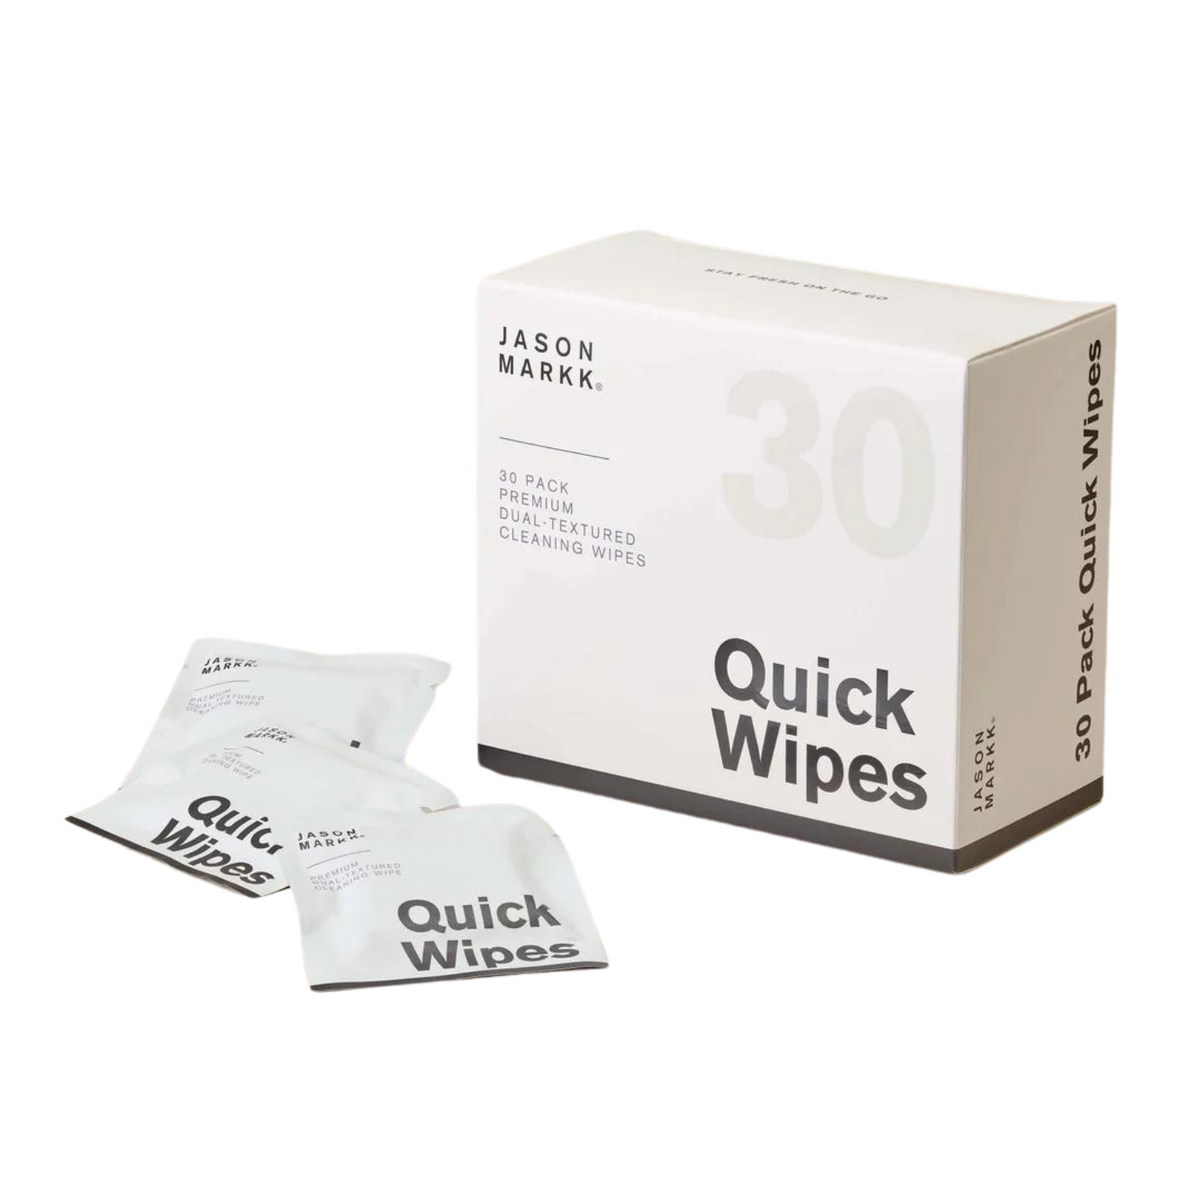 QUICK WIPES 30 PACK - REFRESH